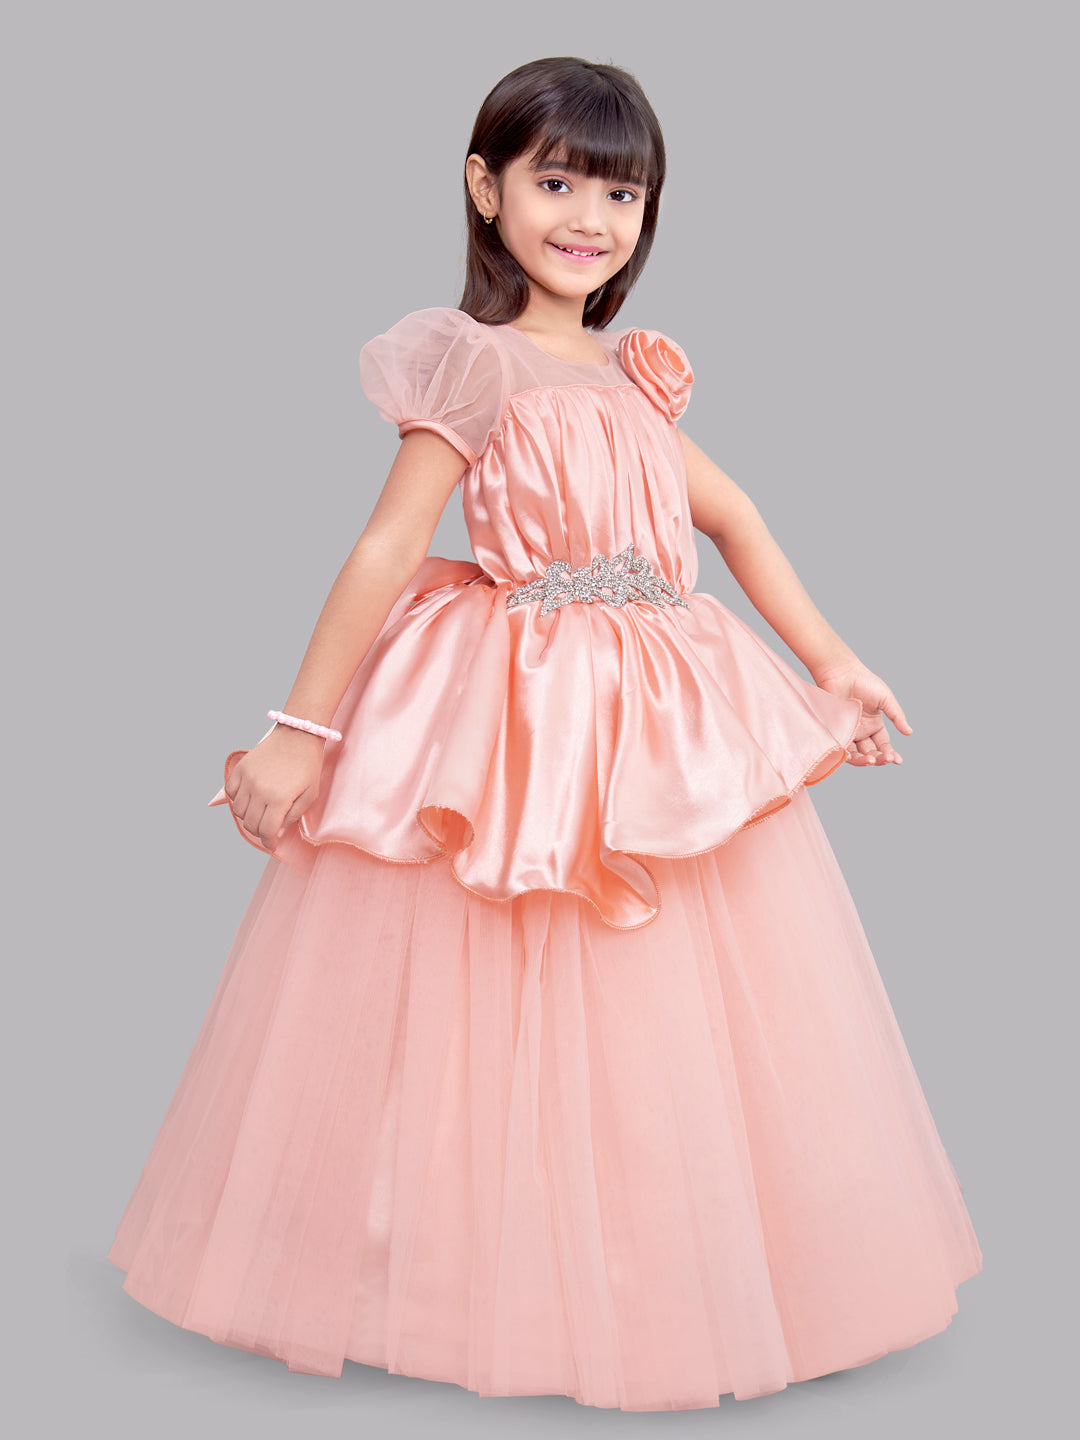 Buy Cream Dresses & Frocks for Girls by PINK CHICK Online | Ajio.com